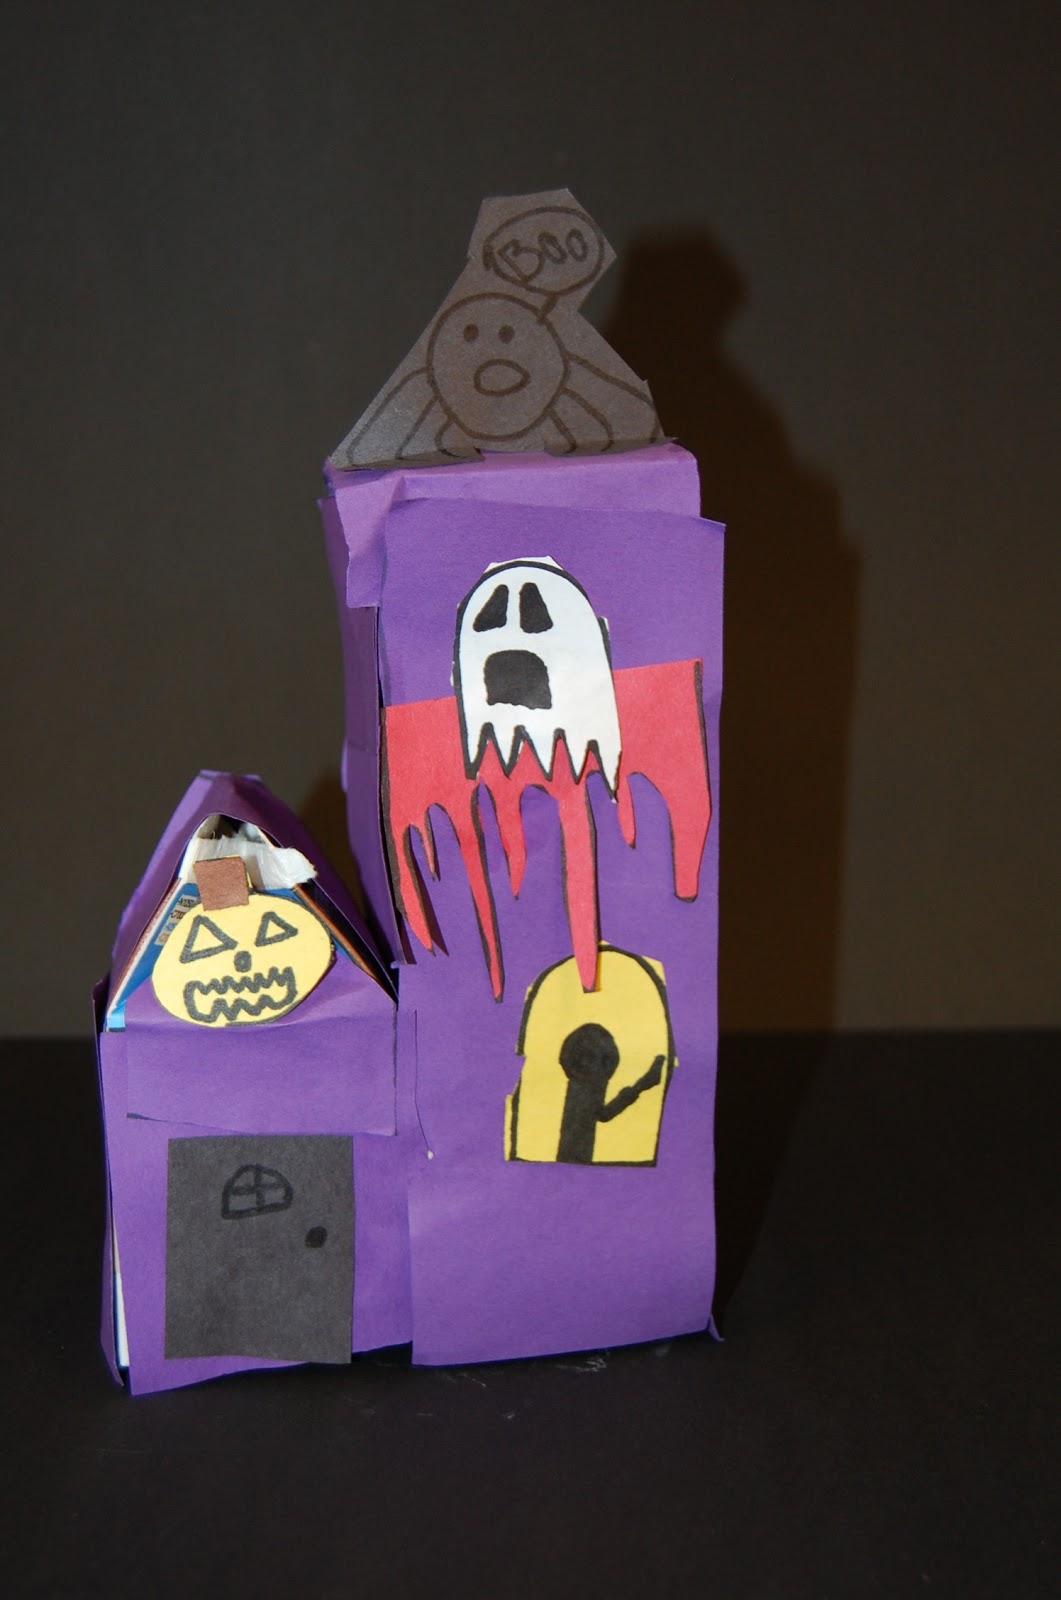 The finished product: a state-of-the art haunted house, designed by your students!